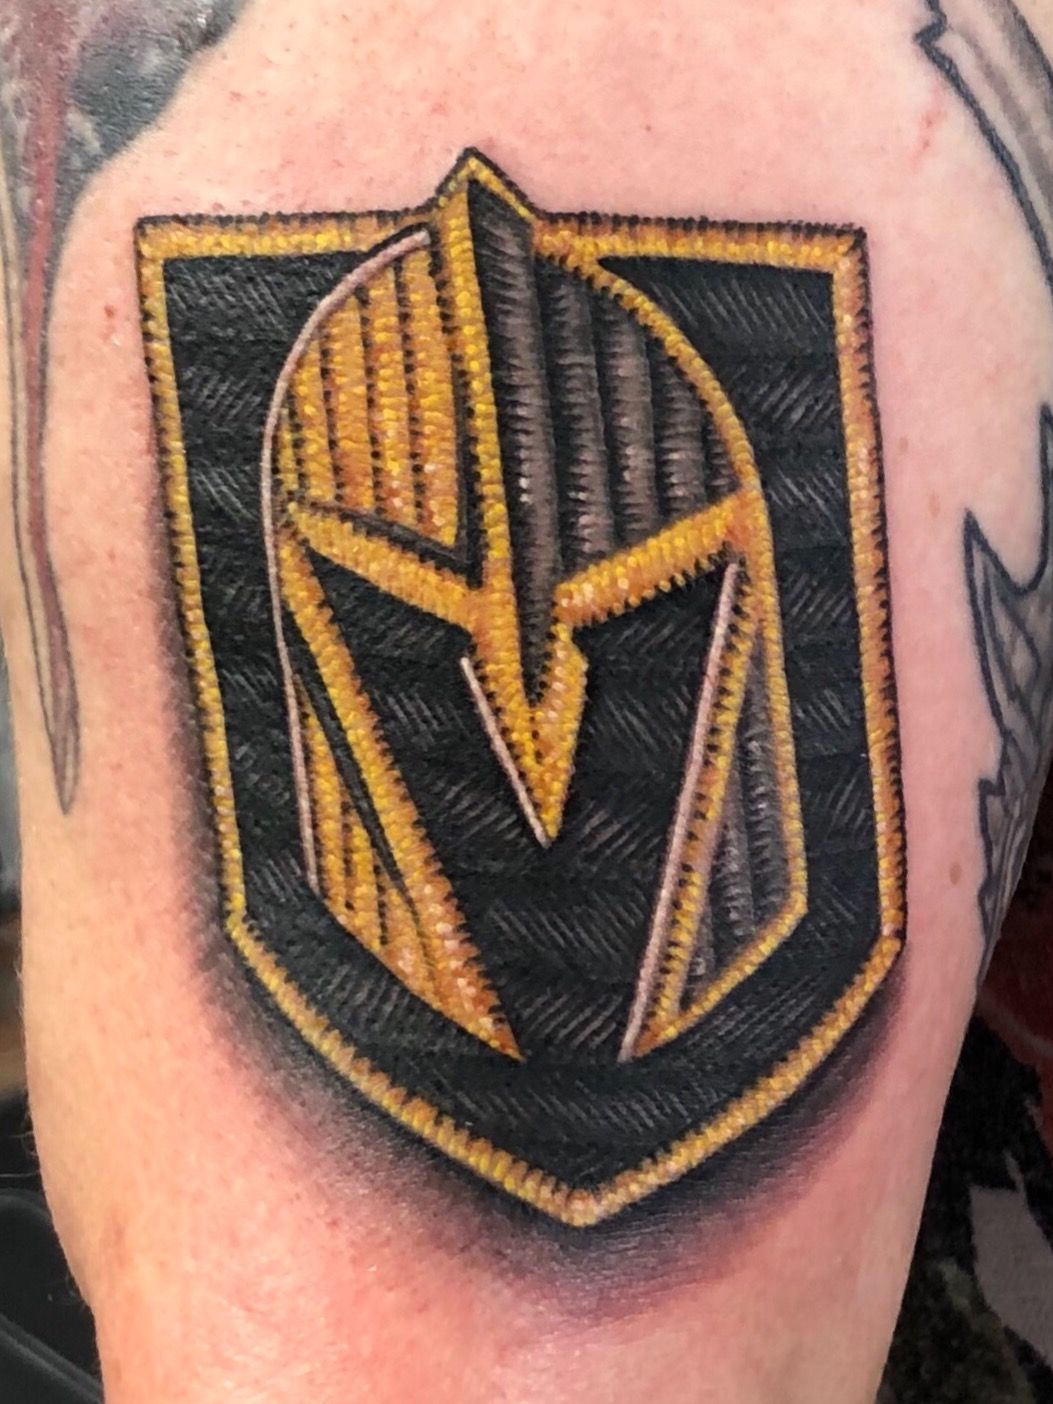 Golden Knights fans get team logo tattooed, in hair and on nails